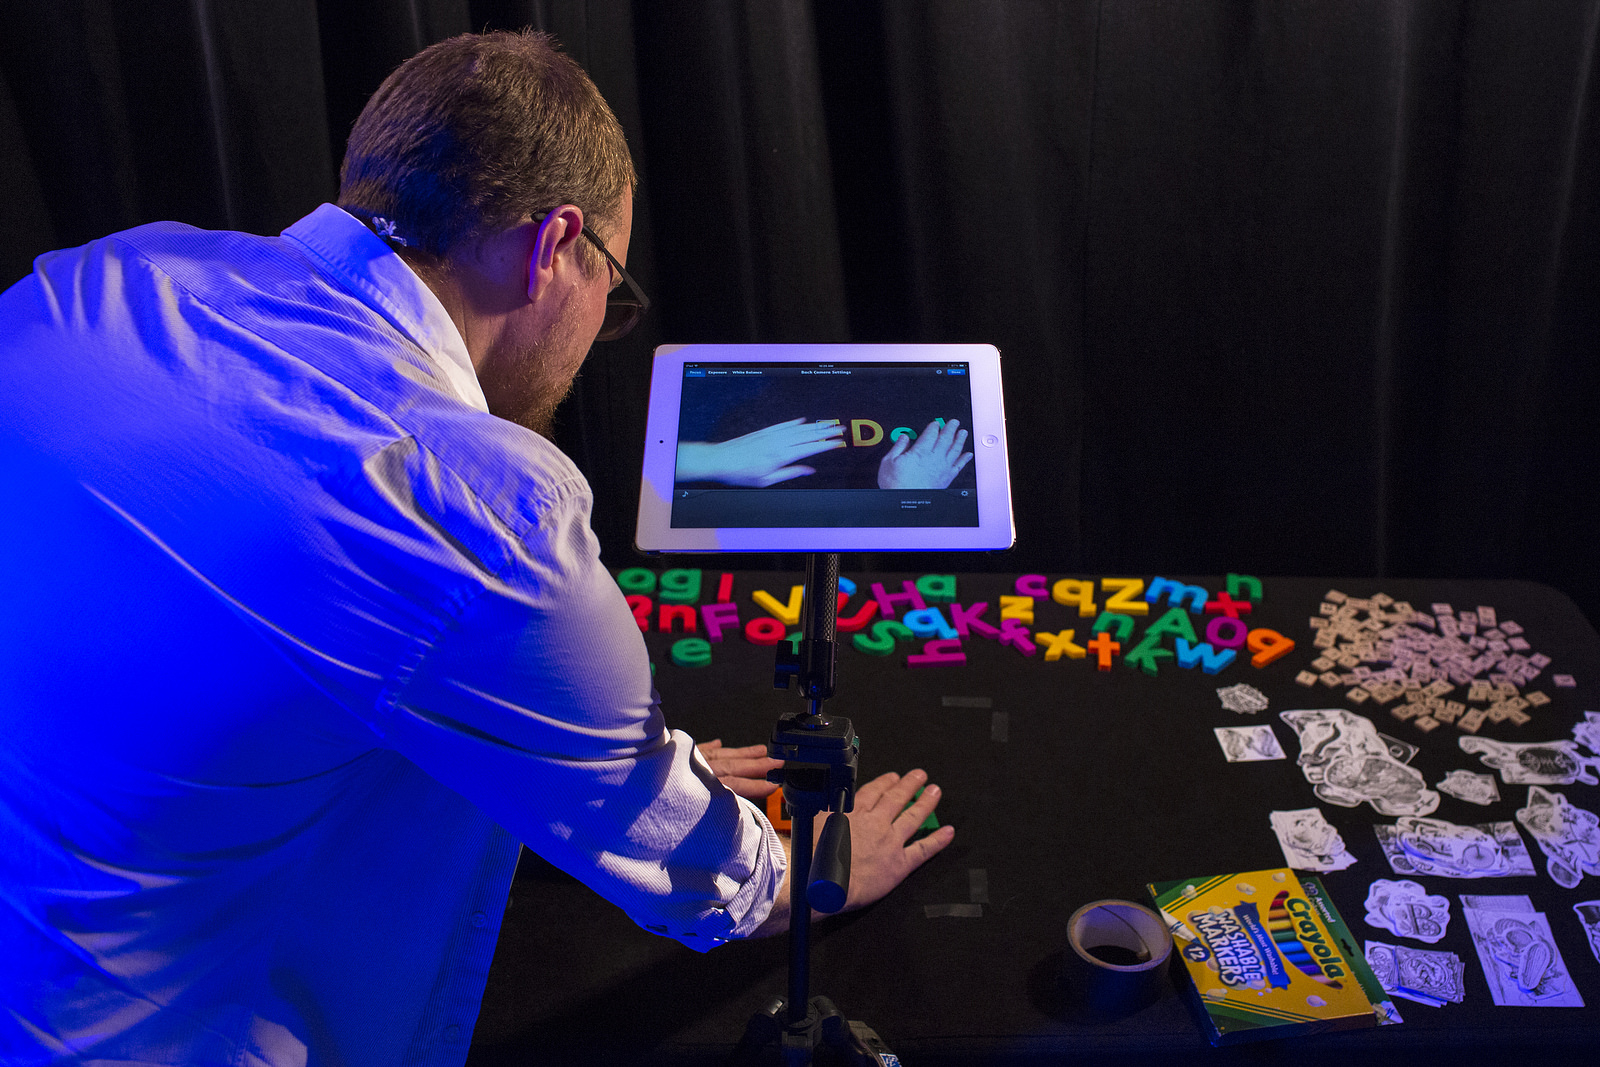 An animation station, courtesy of TED-Ed, in Whistler. Photo: Sarah Nickerson